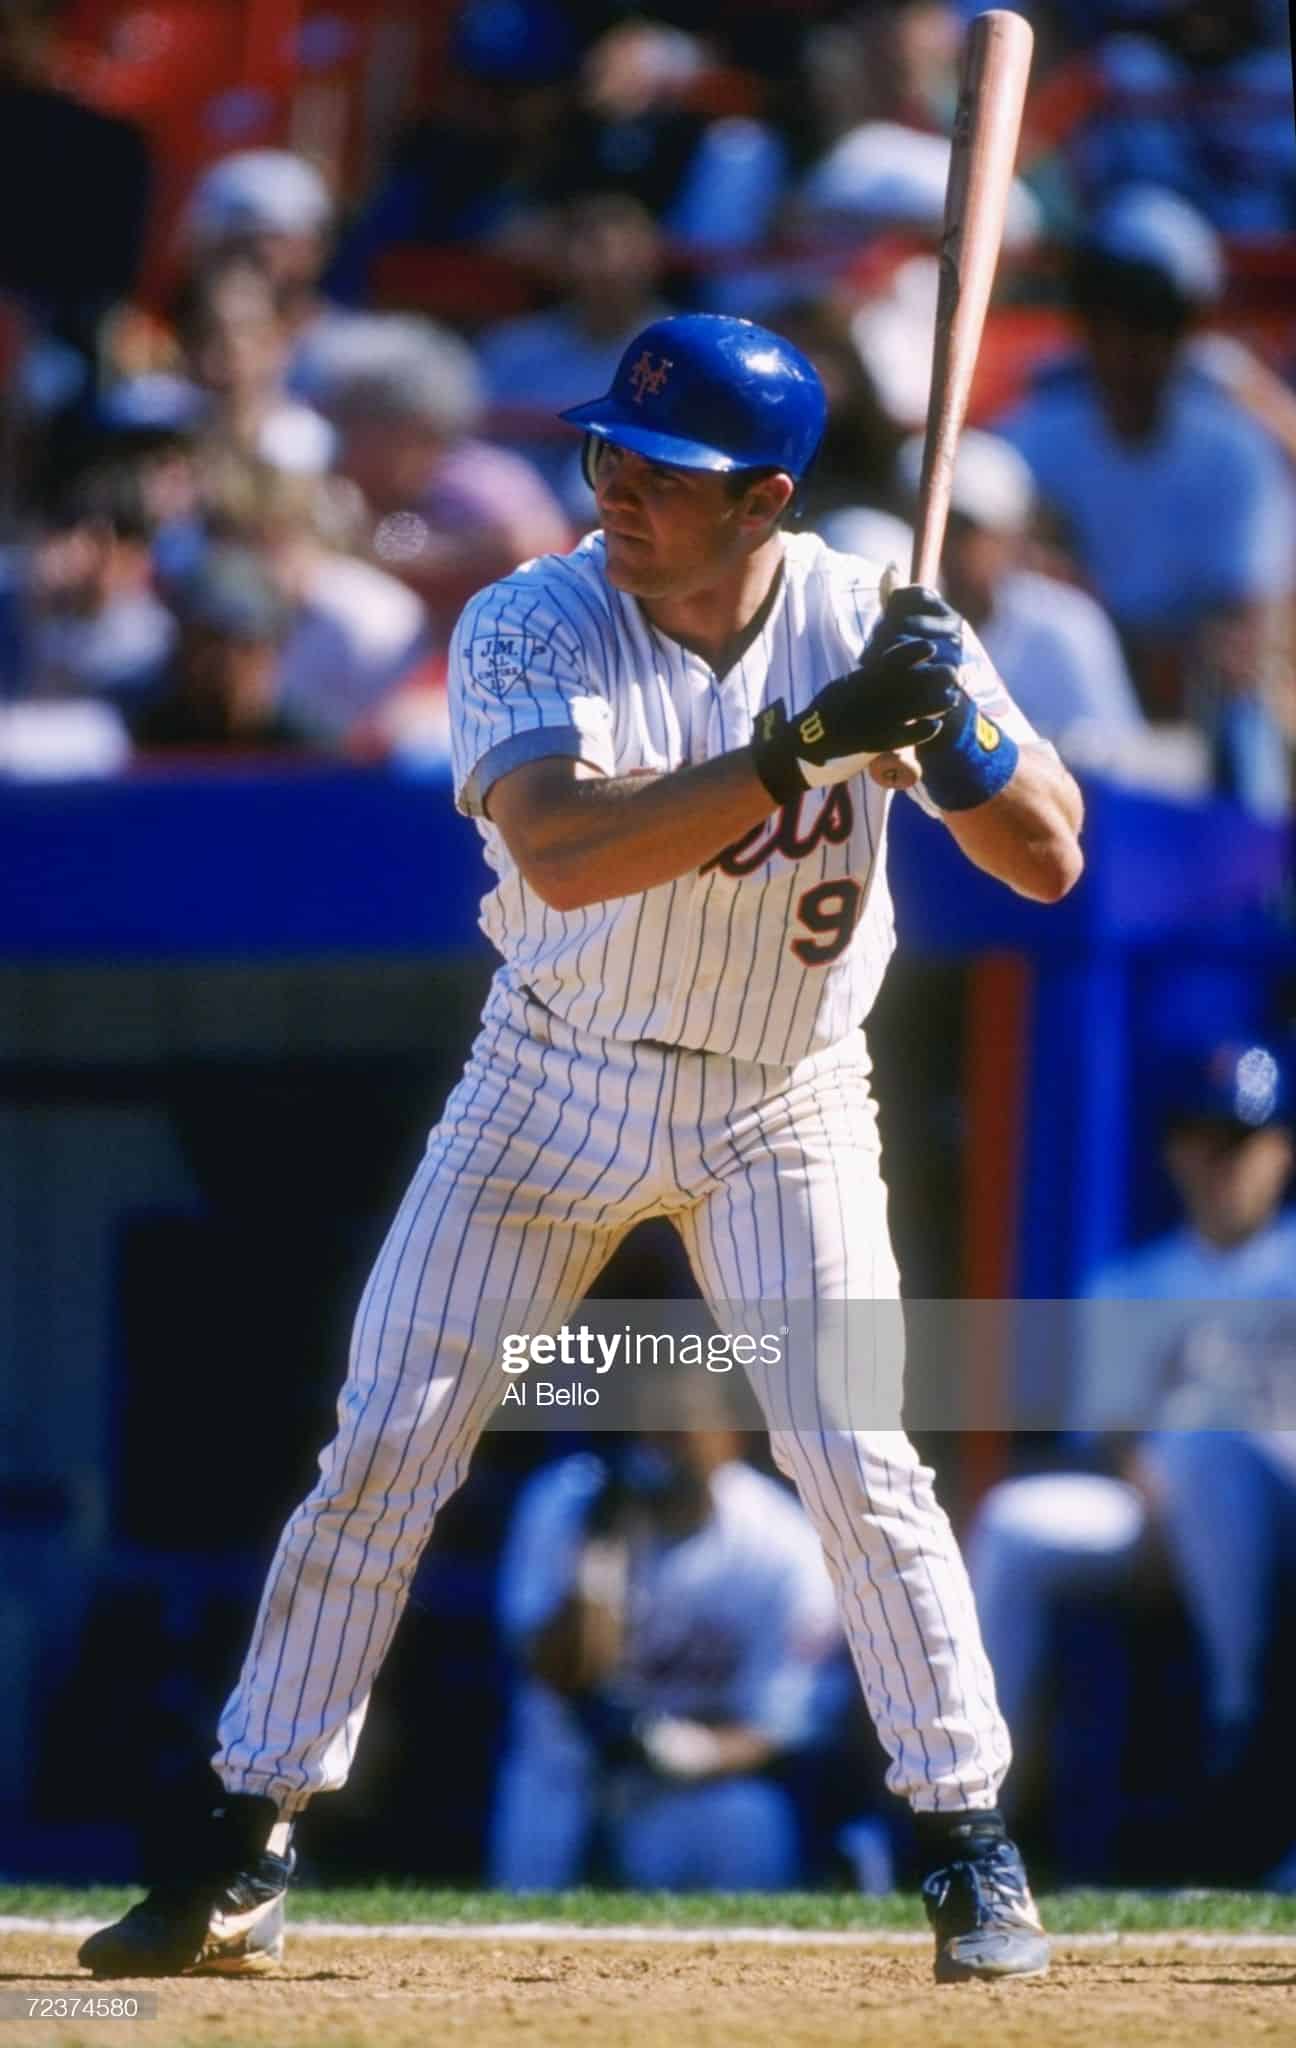 Former New York Mets catcher Todd Hundley batting during a May 25, 1996 game against the Padres at Shea Stadium